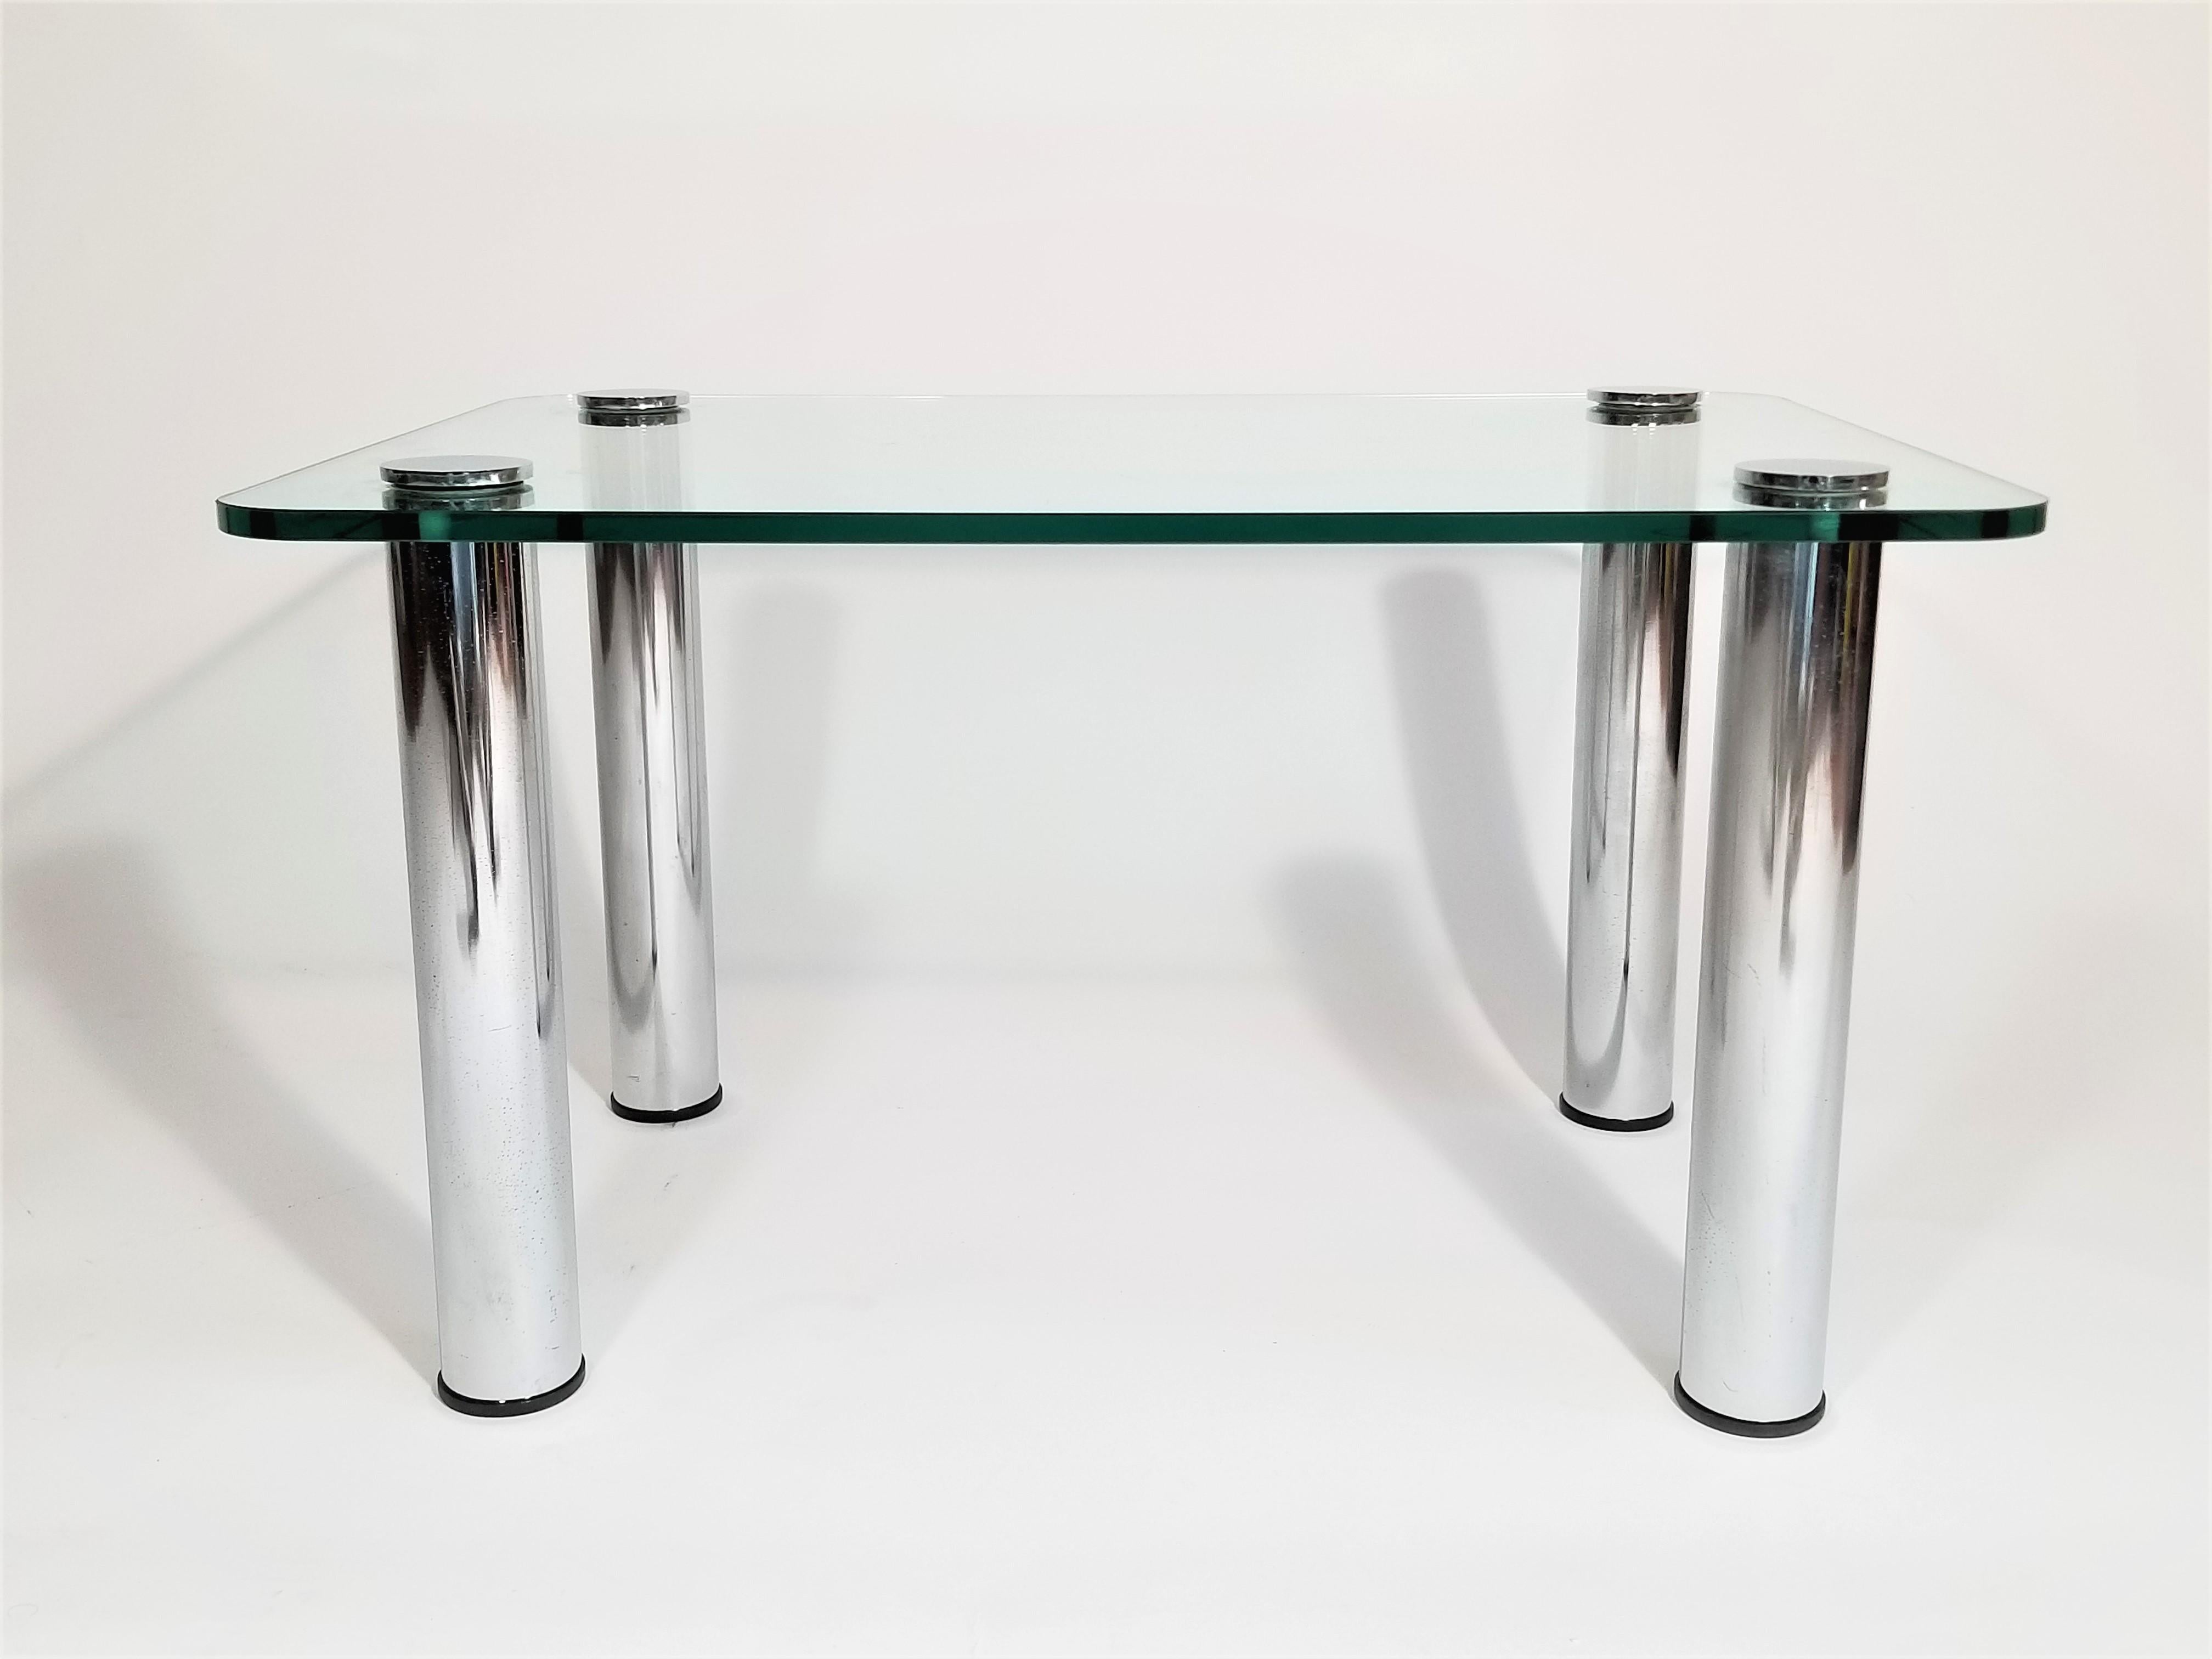 1970s-1980s glass and chrome pace table. Chromed steel cylinder legs. Glass has rounded edges 0.5 inches thick. This is an ideal end table or petit coffee / cocktail table.
Complimentary Delivery can be arranged for this piece in NYC and